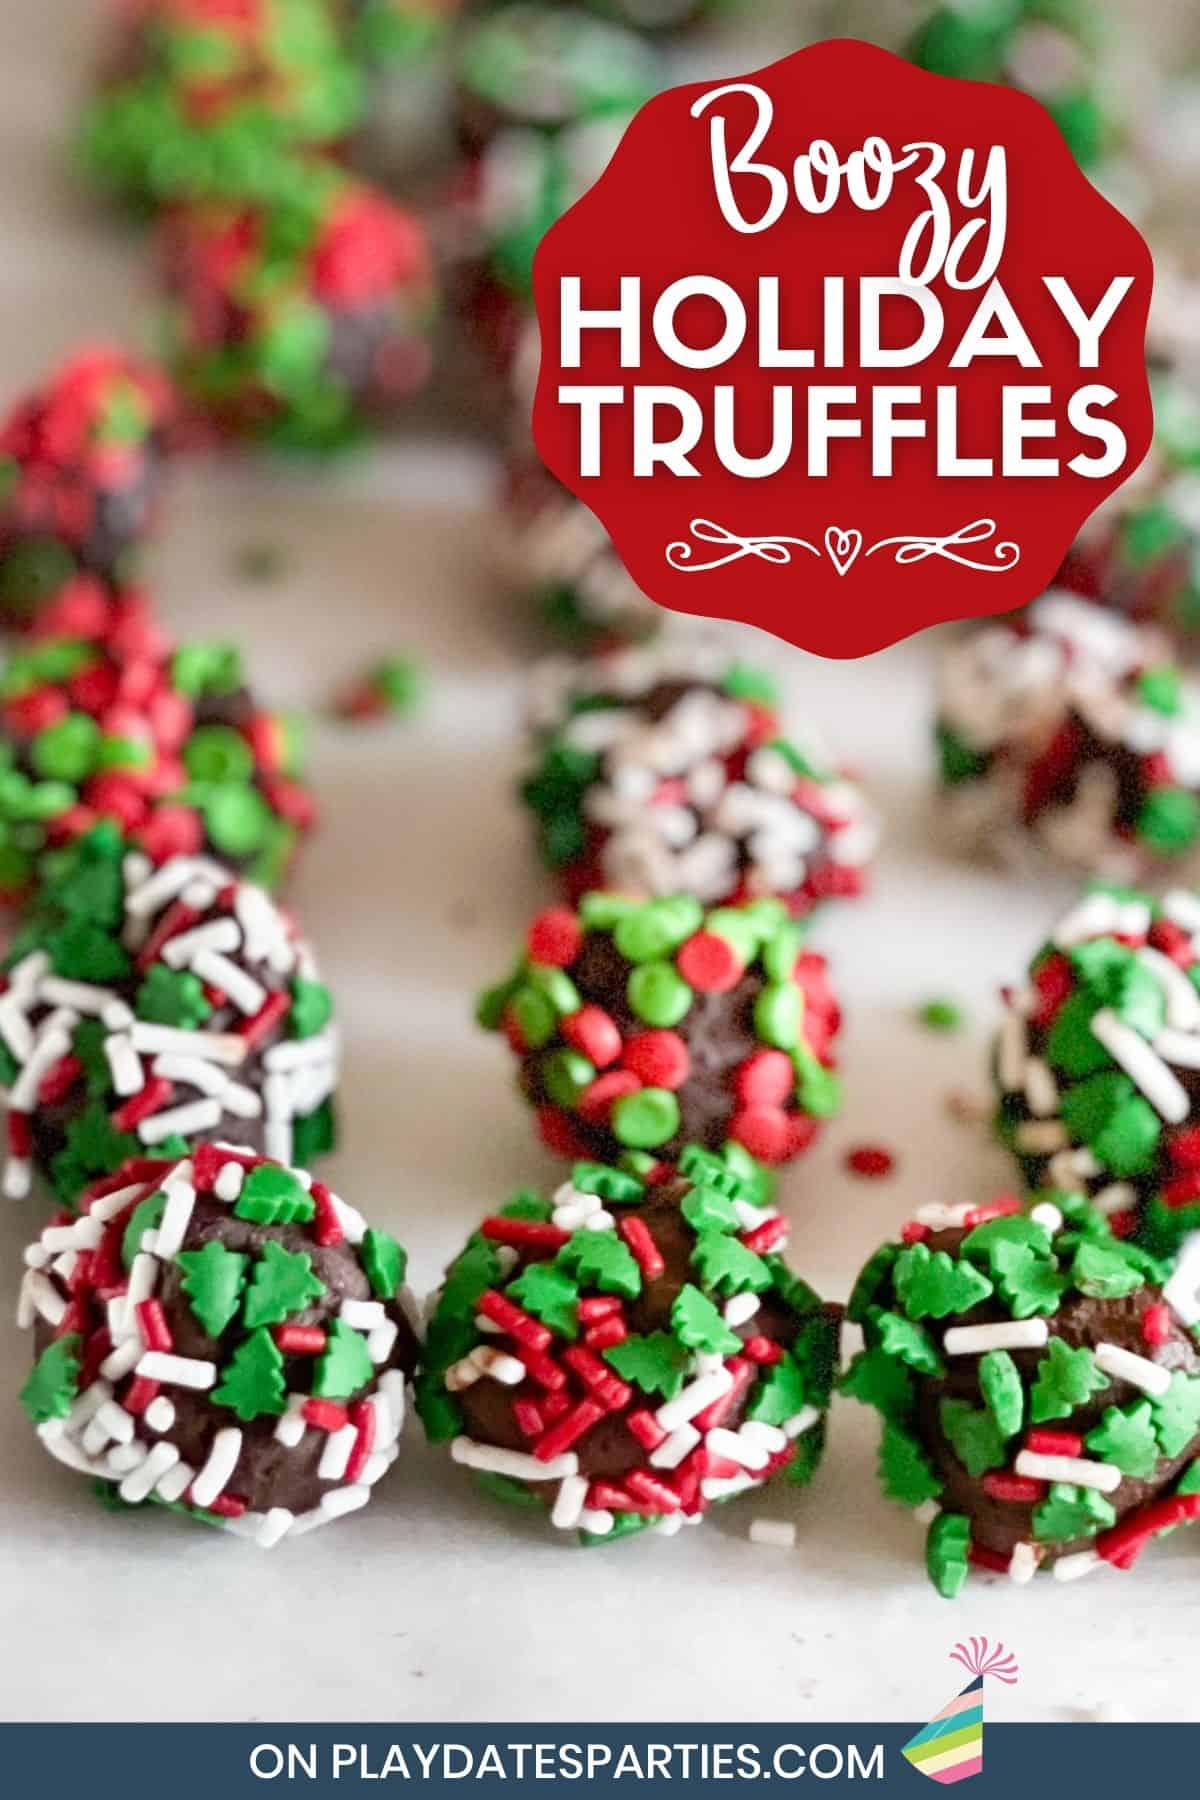 Rows of chocolate truffles covered in holiday sprinkles on a baking tray.